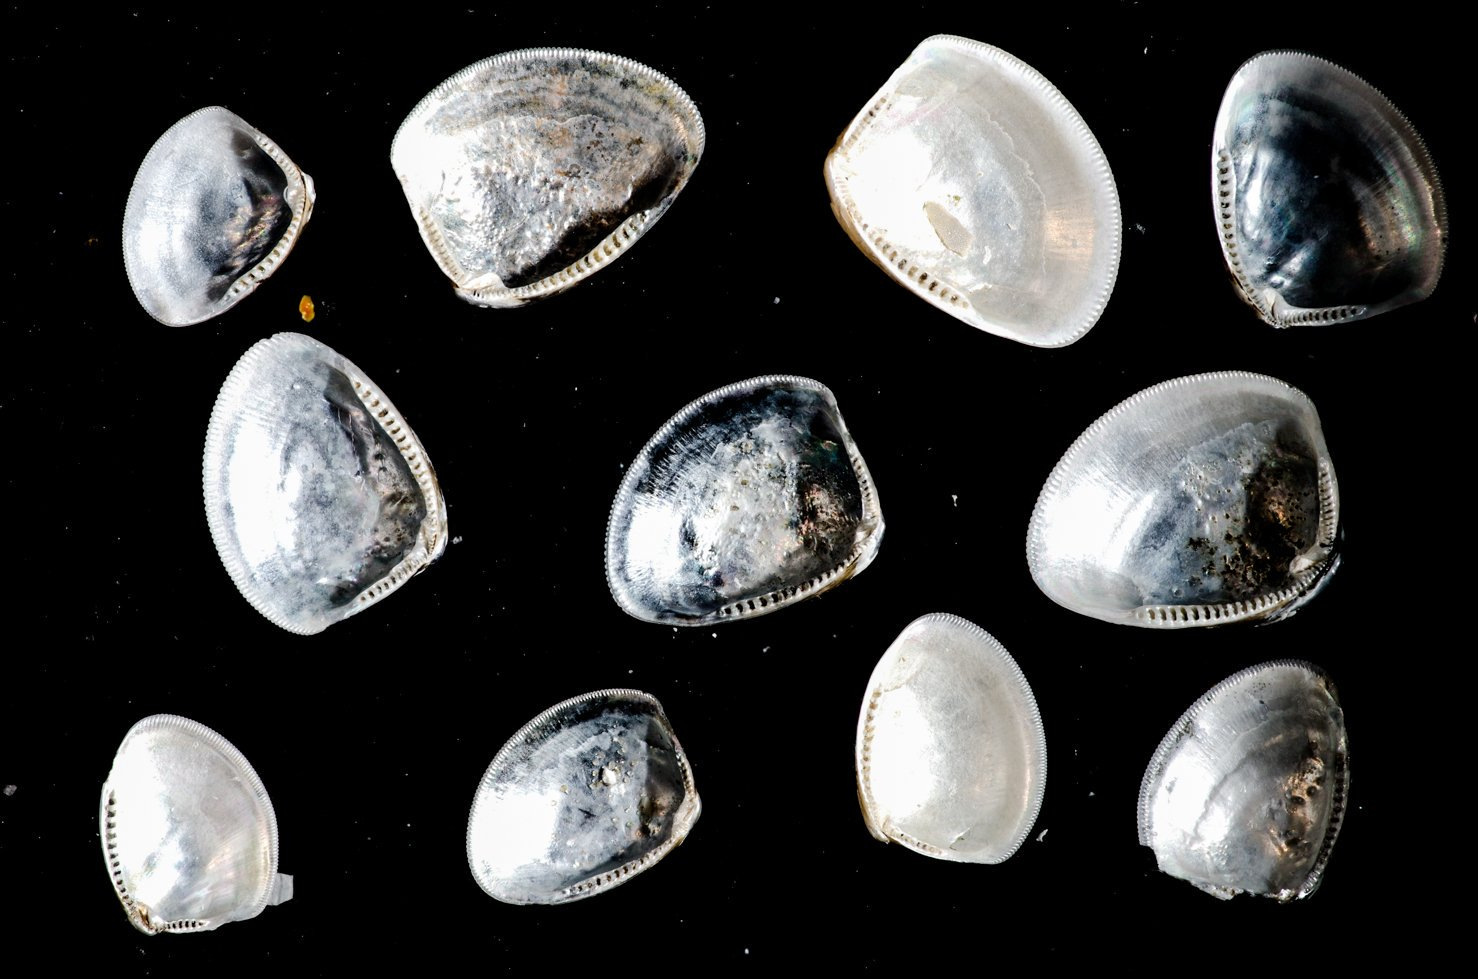 Another beautiful bivalve that we find frequently is Nucula nitidosa, with its shiny mother-of-pearl inside and characteristic teeth along the shell edge. Photo: Lodewijk van Walraven